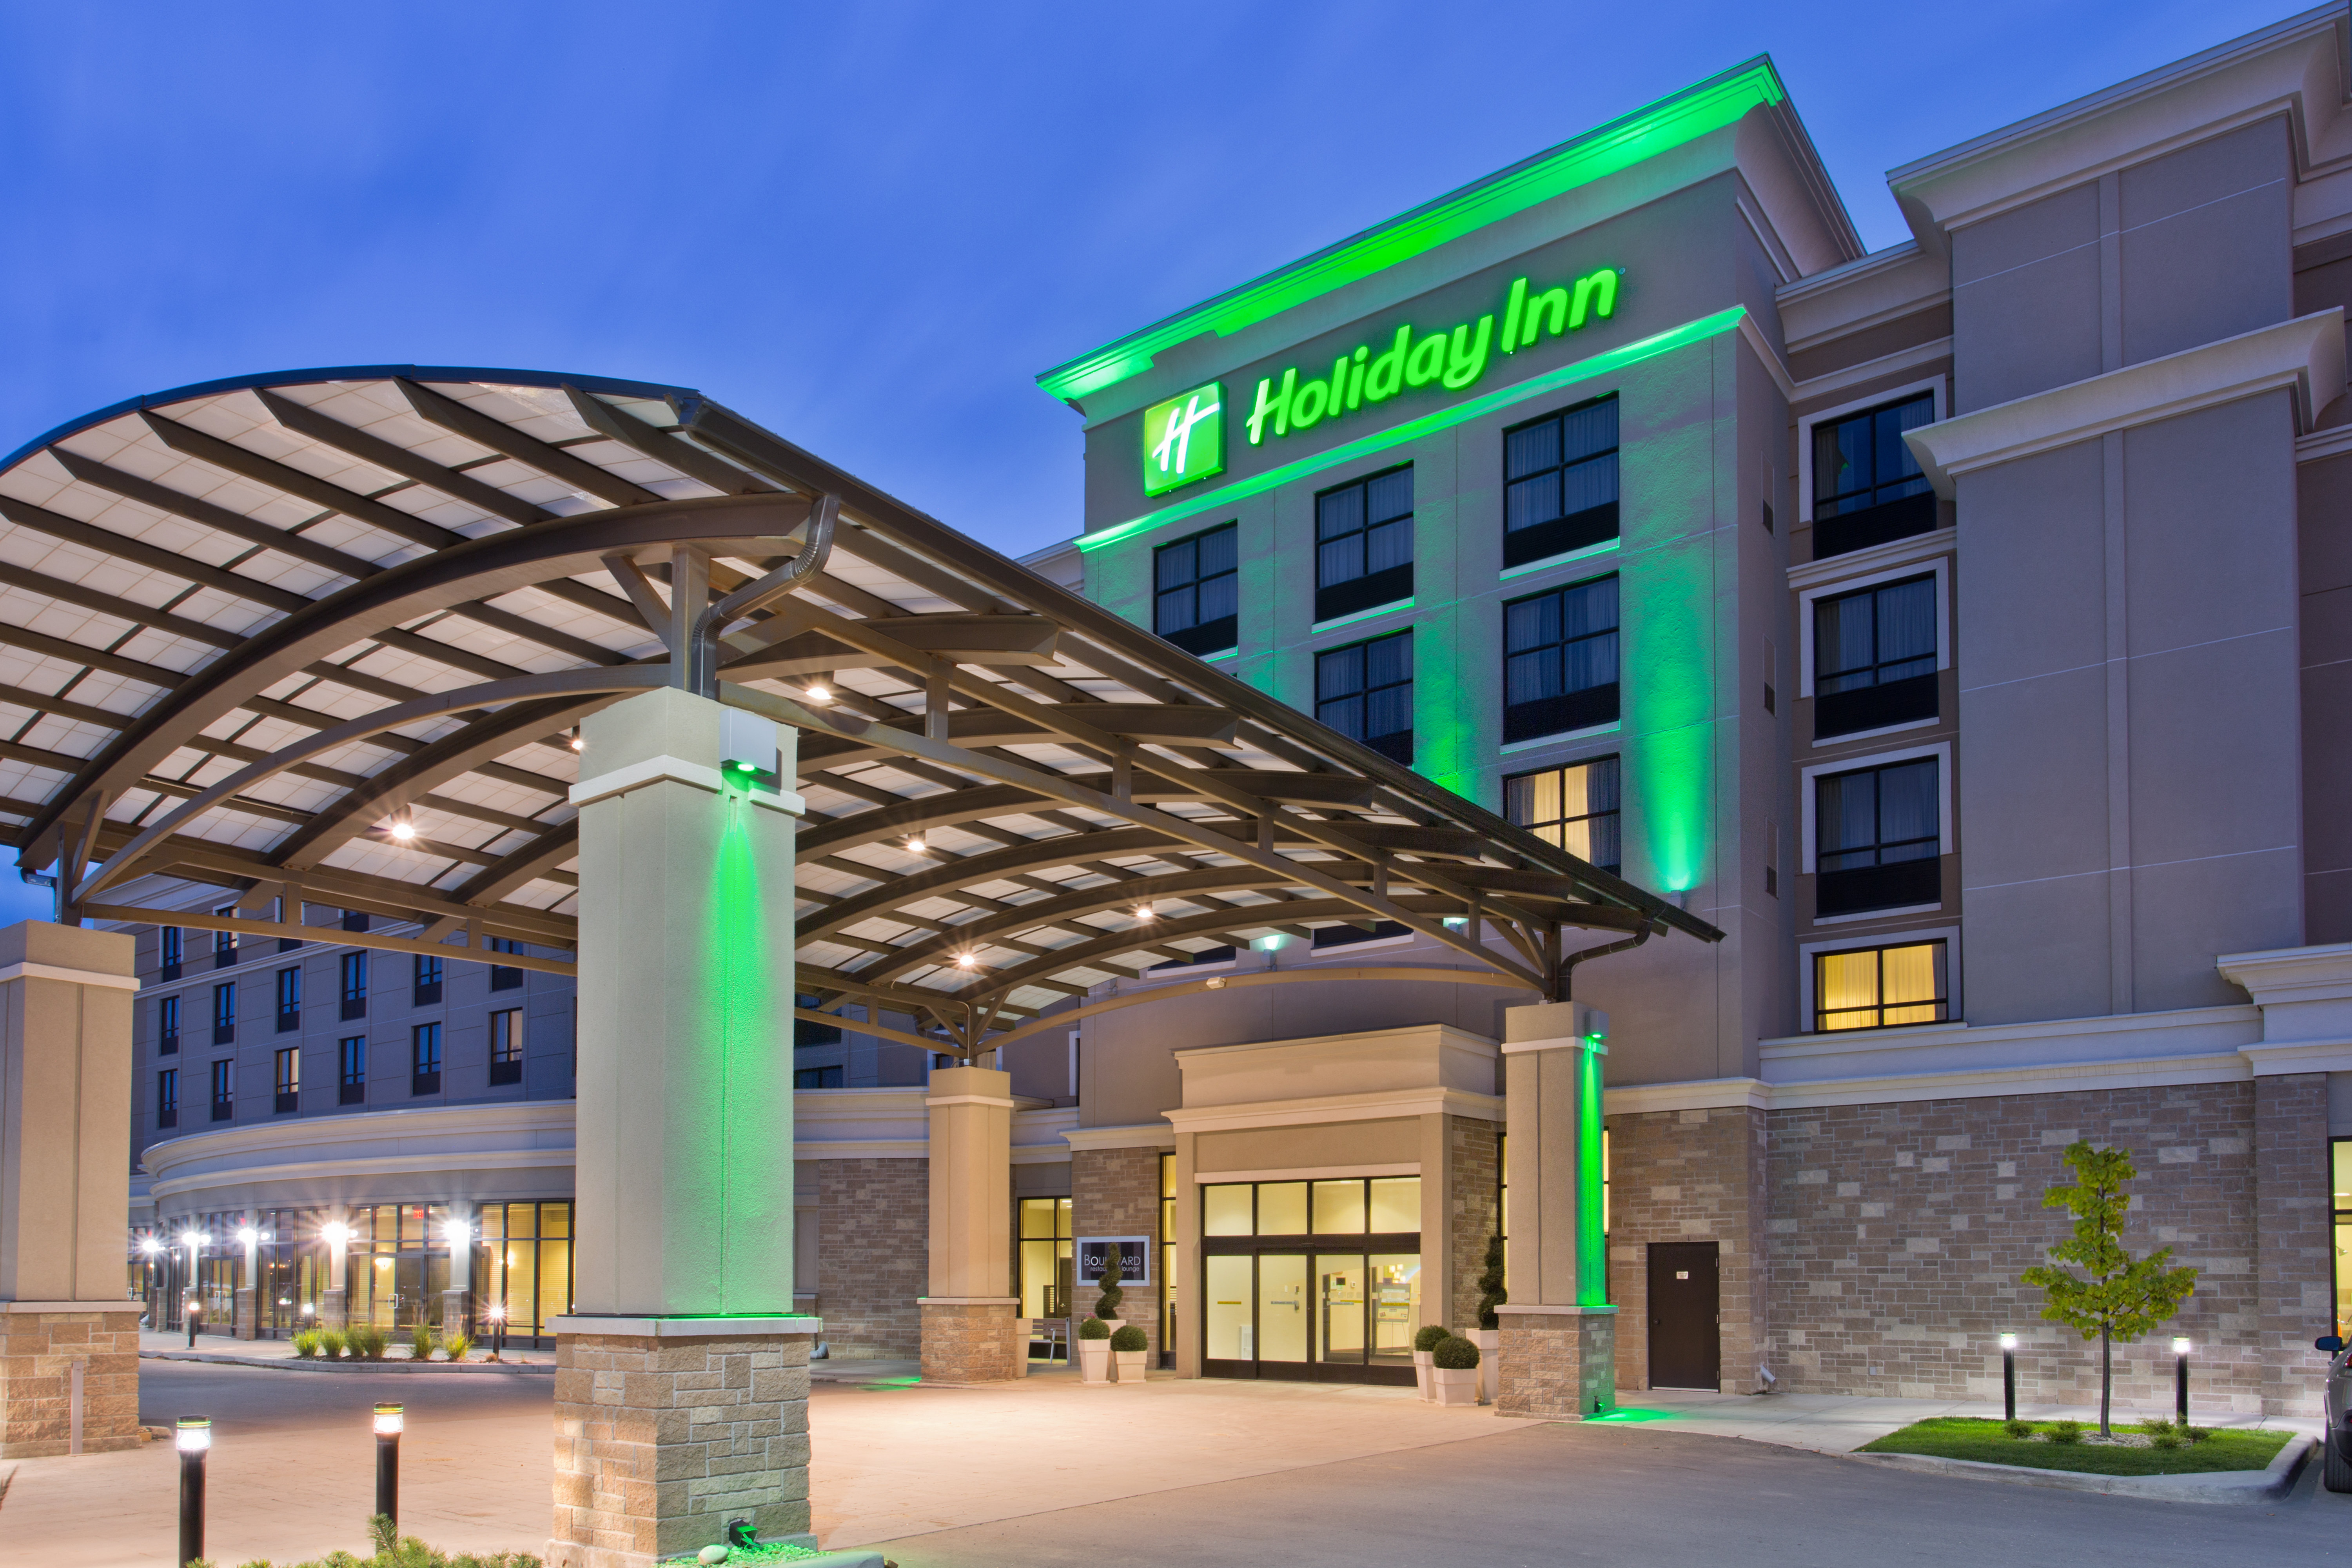 Welcome to the Holiday Inn Red Deer South in Gasoline Alley